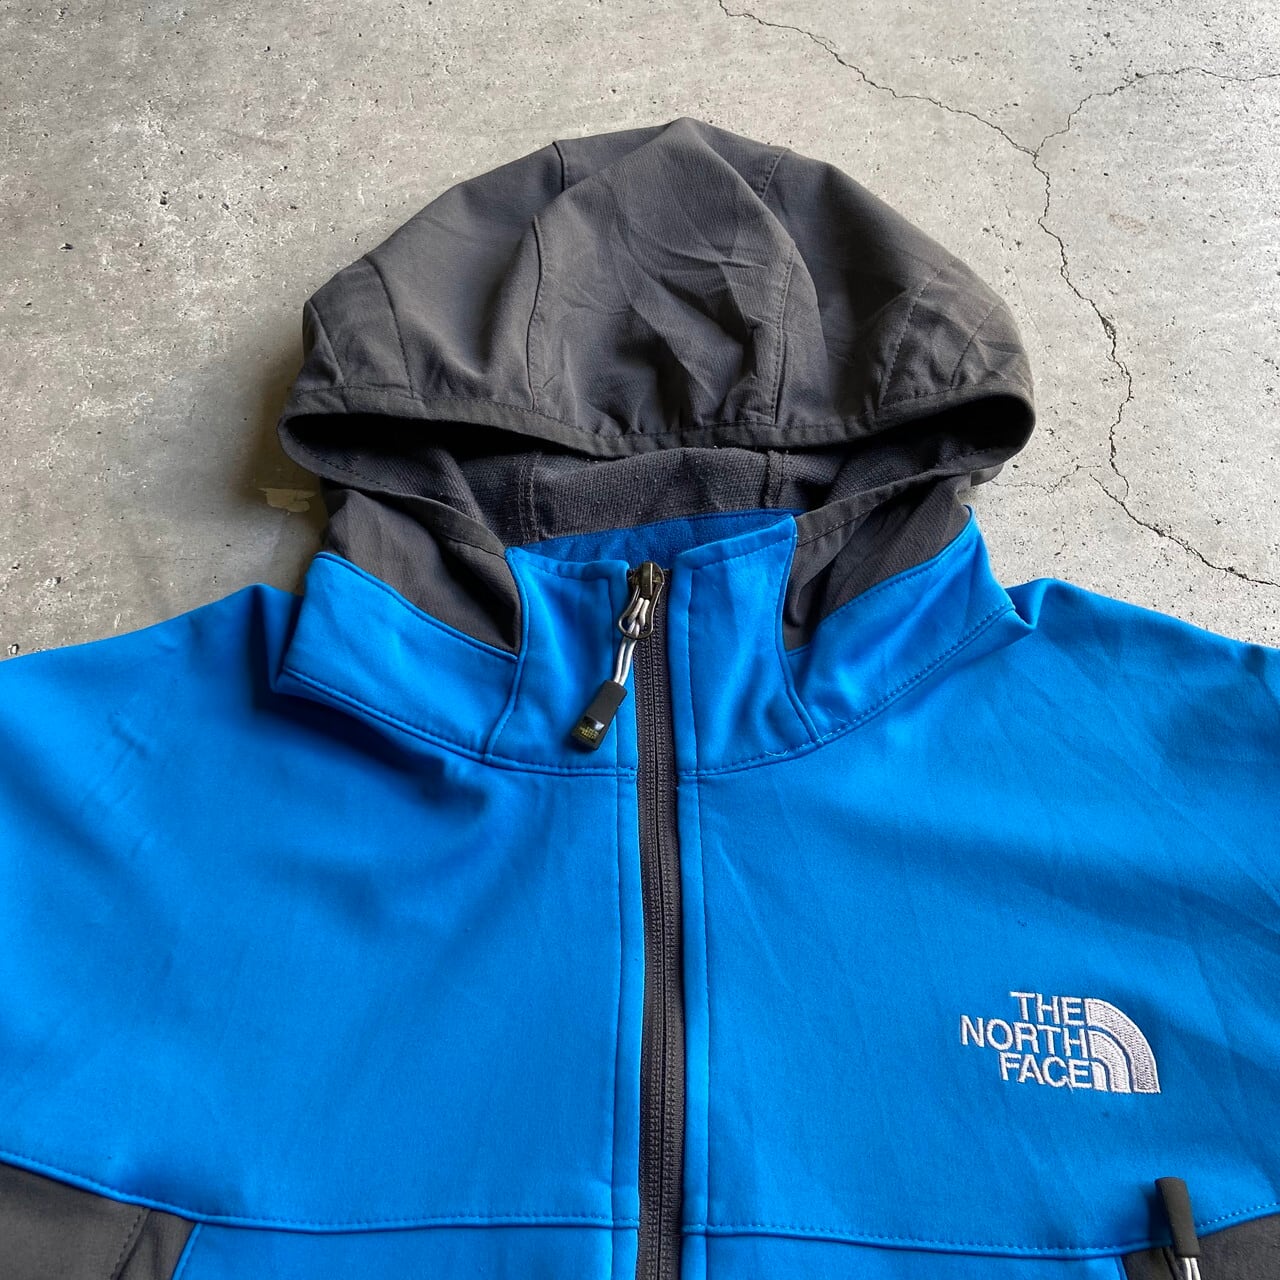 THE NORTH FACE ザ ノースフェイス SUMMIT SERIES WIND STOPPER ソフト